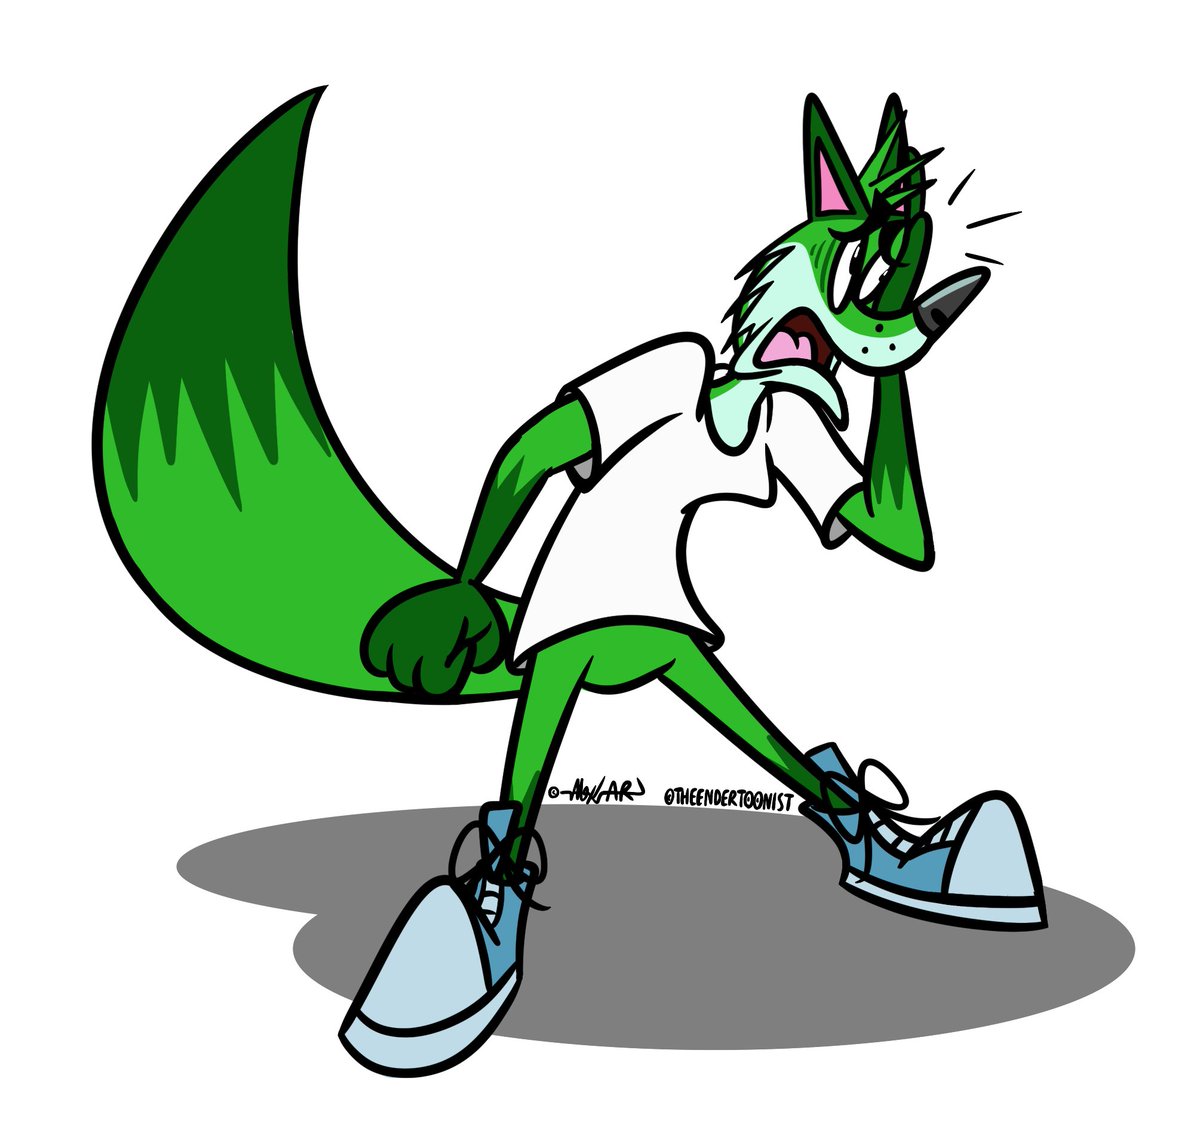 ~Kaleo Fox Seeing Something Wrong (Sticker Design)~

My fifth sticker design of Kaleo Fox! I might do three more stickers of Kaleo if I have better ideas on what they will be! ;) 

#oc #cartooncharacter #fox #kaleofox #sticker #stickerdesign #digitalart